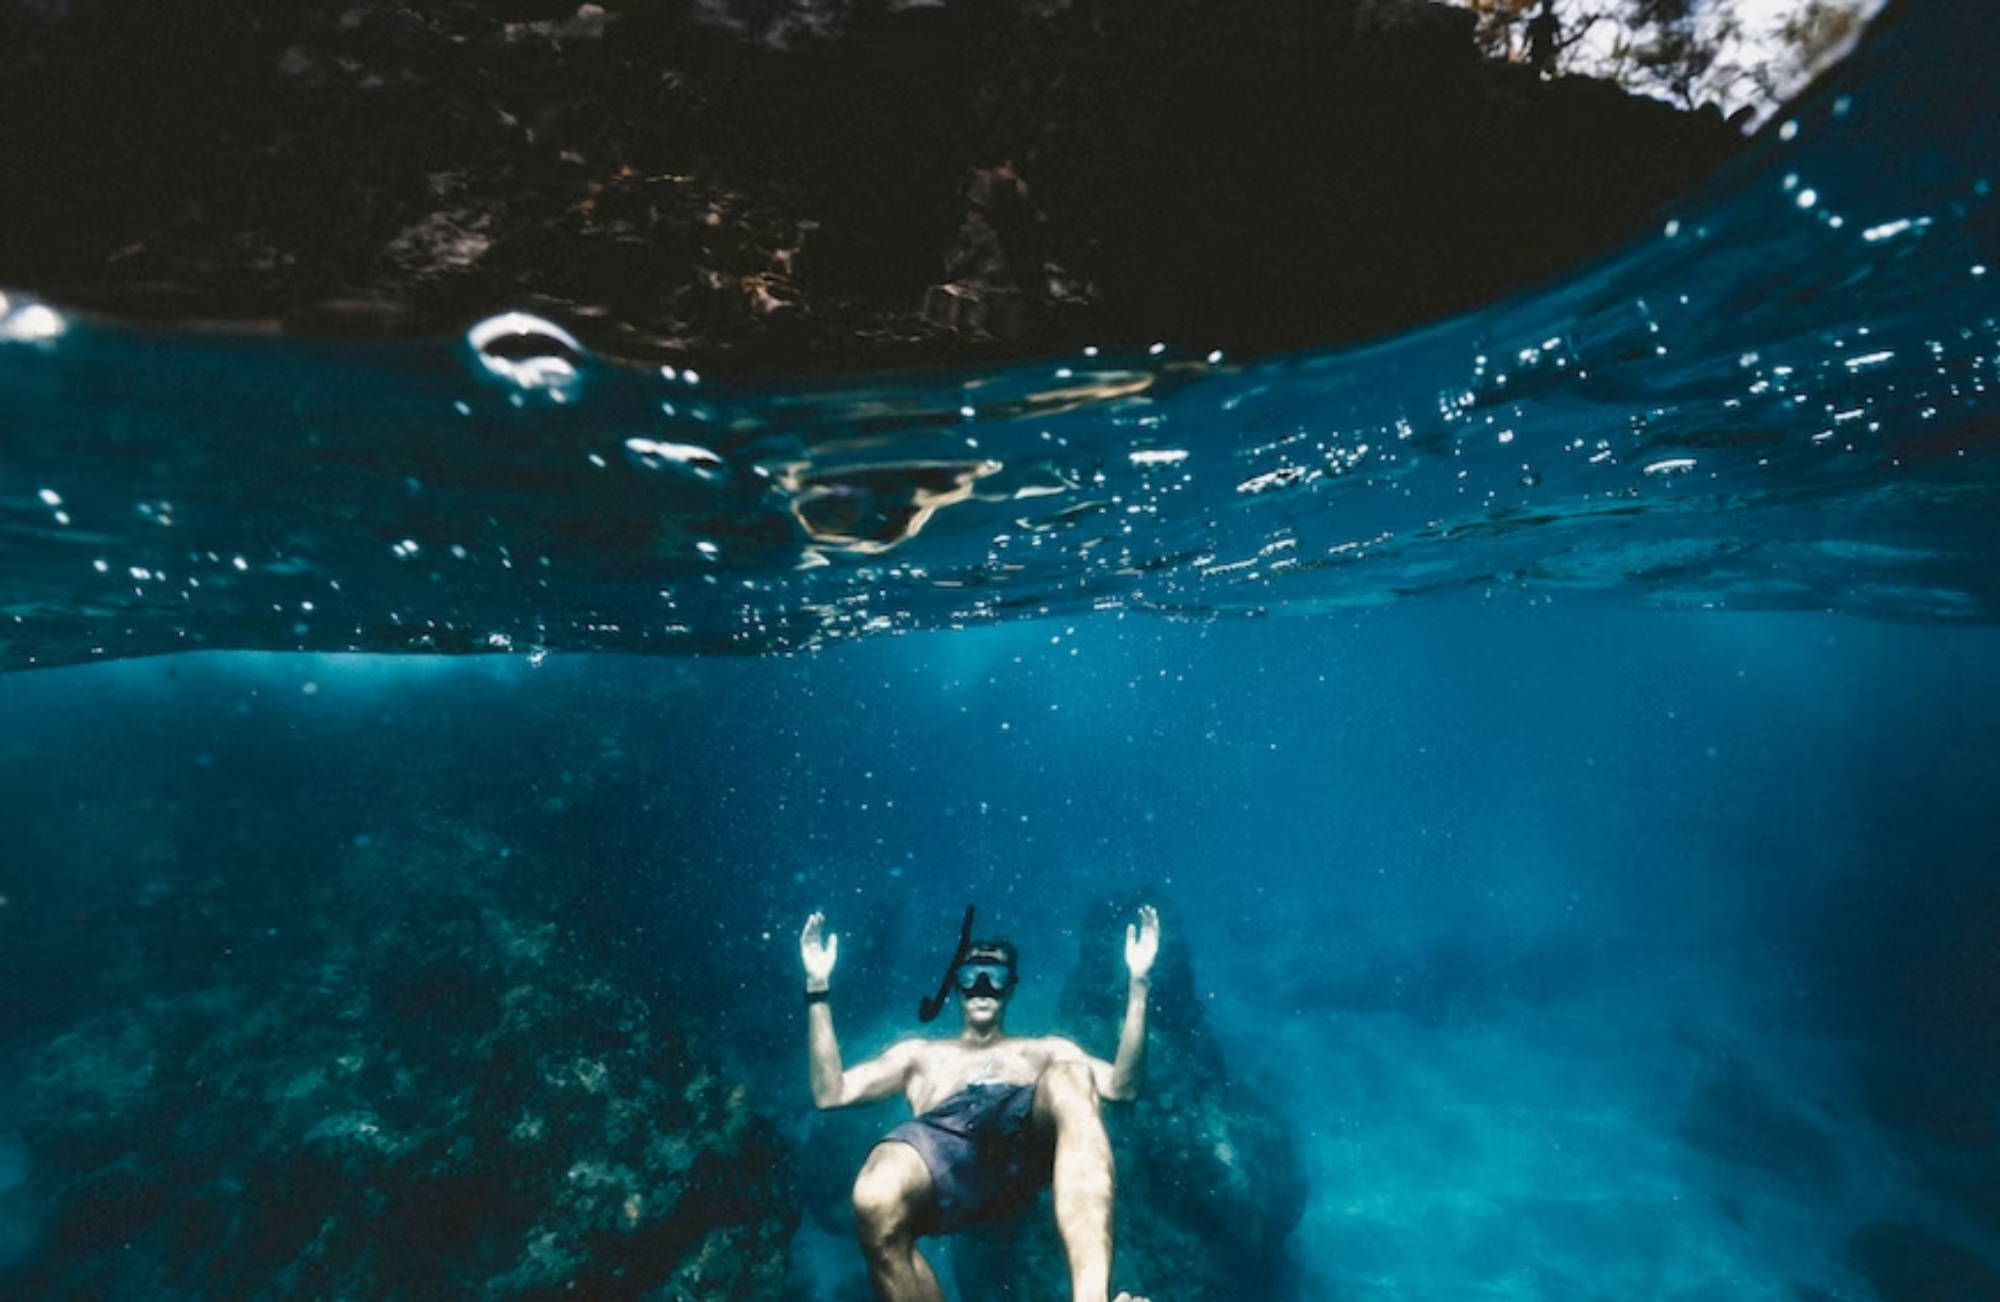 man floating below the surface in clear, dark blue water, wearing a snorkel mask and swim trunks.